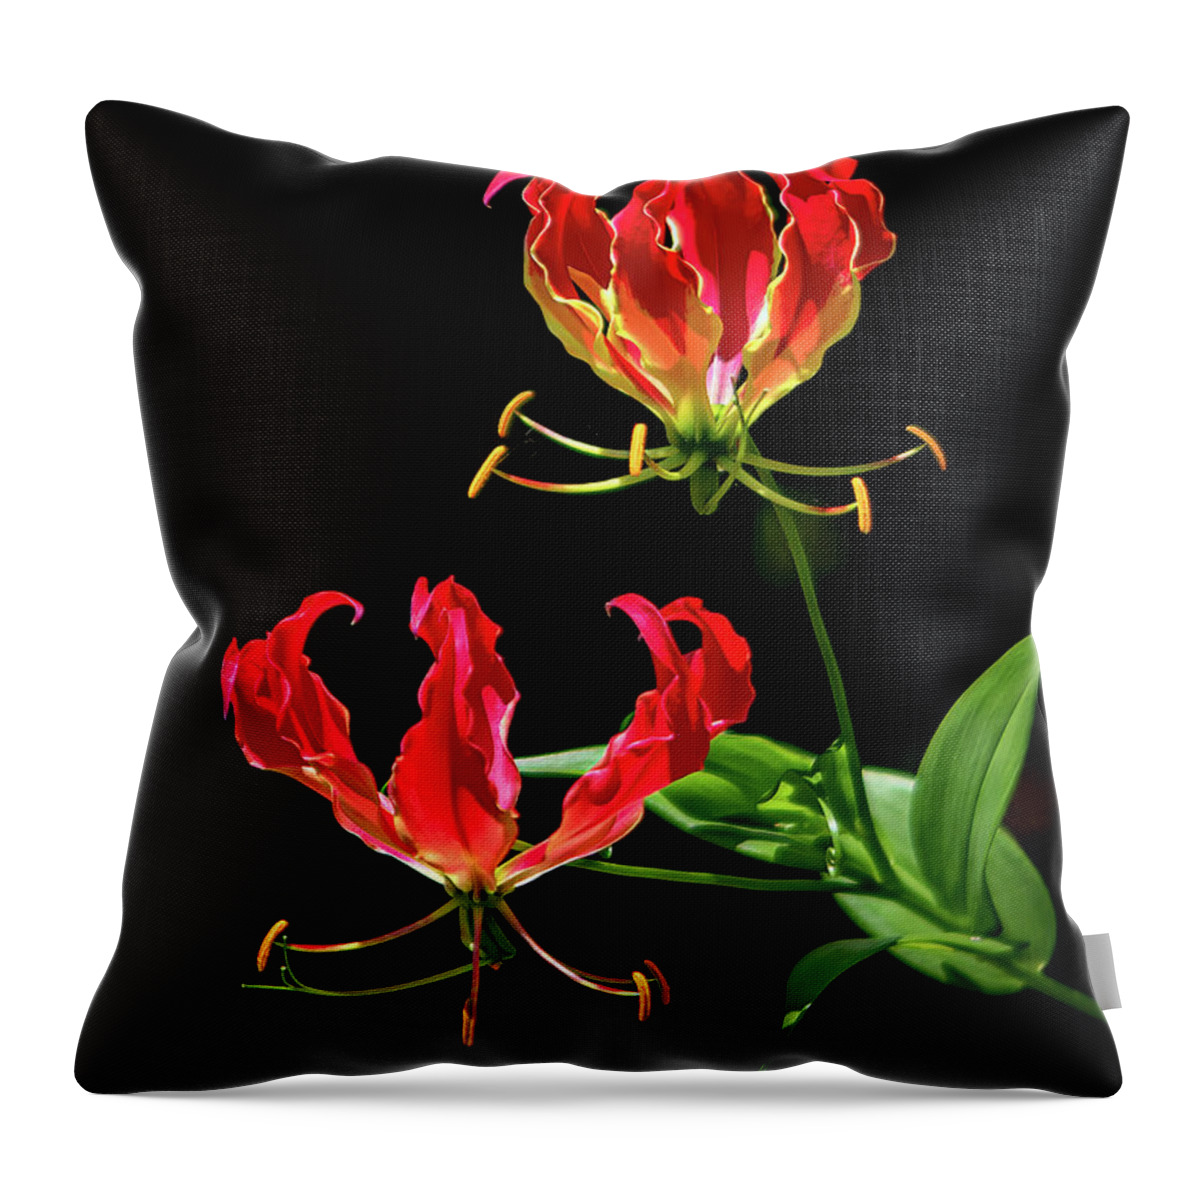 Gloriosa Throw Pillow featuring the photograph Flame Lily by Karen Sirnick